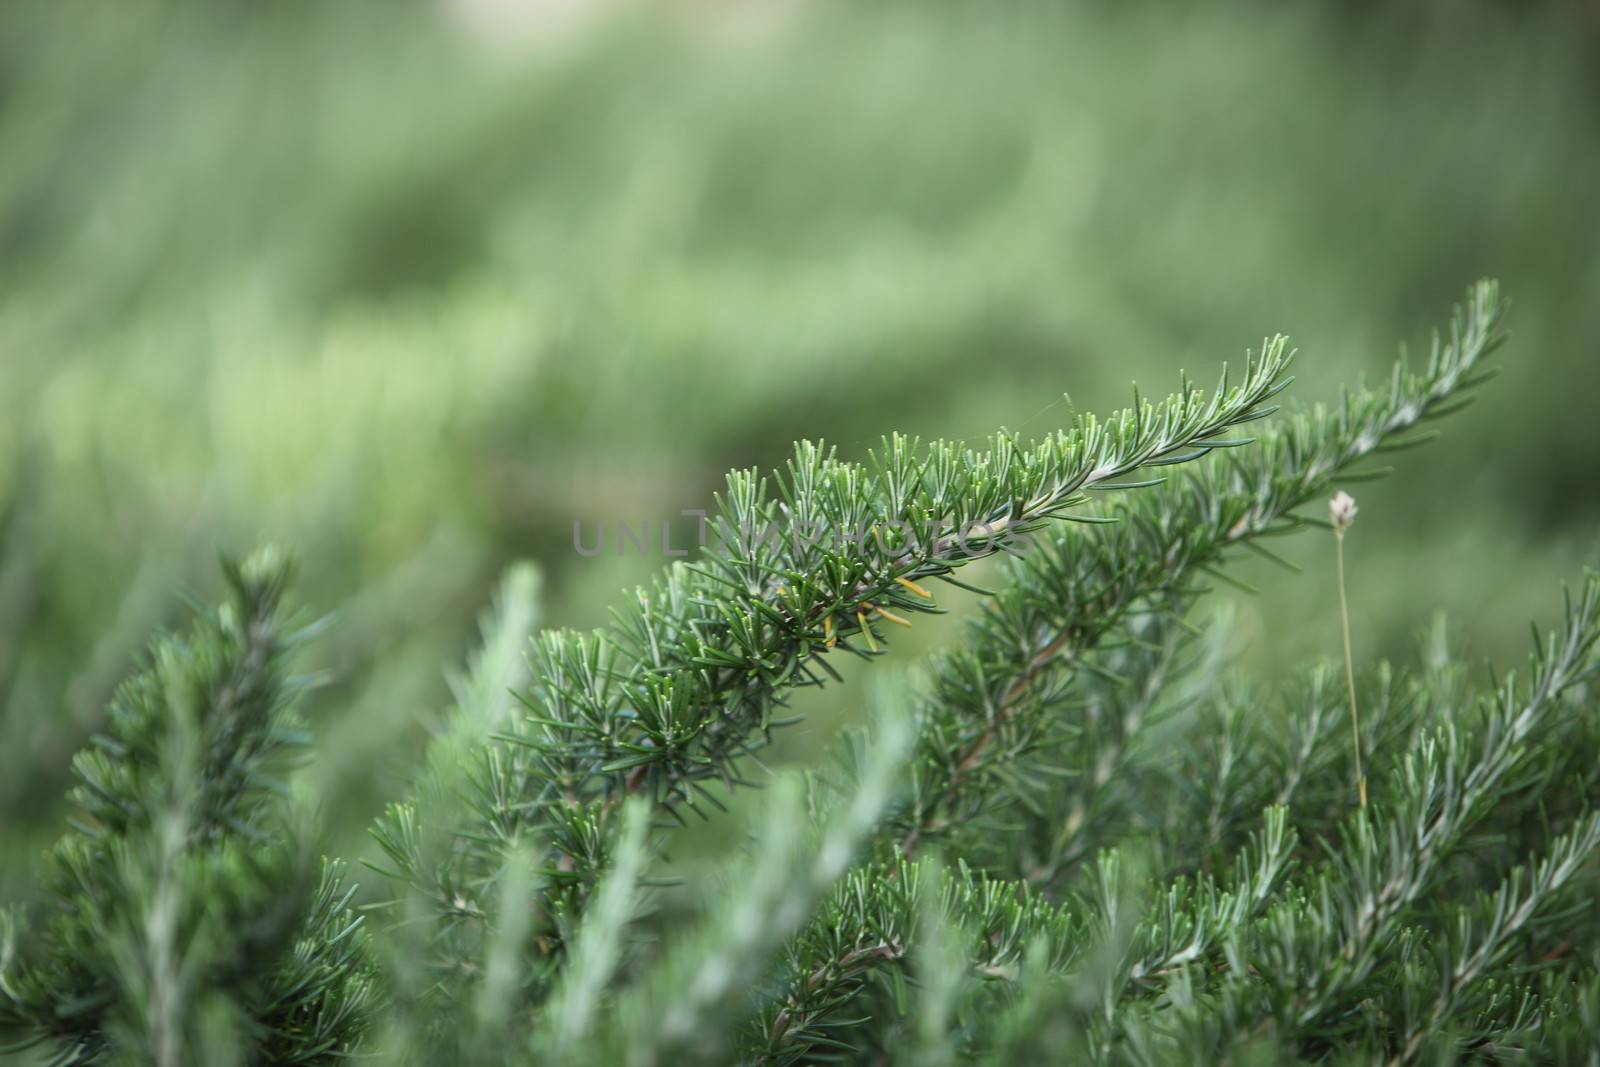 Selective focus of the end of a branch on an evergreen pine tree showing detail of the needles growing outdoors in a forest